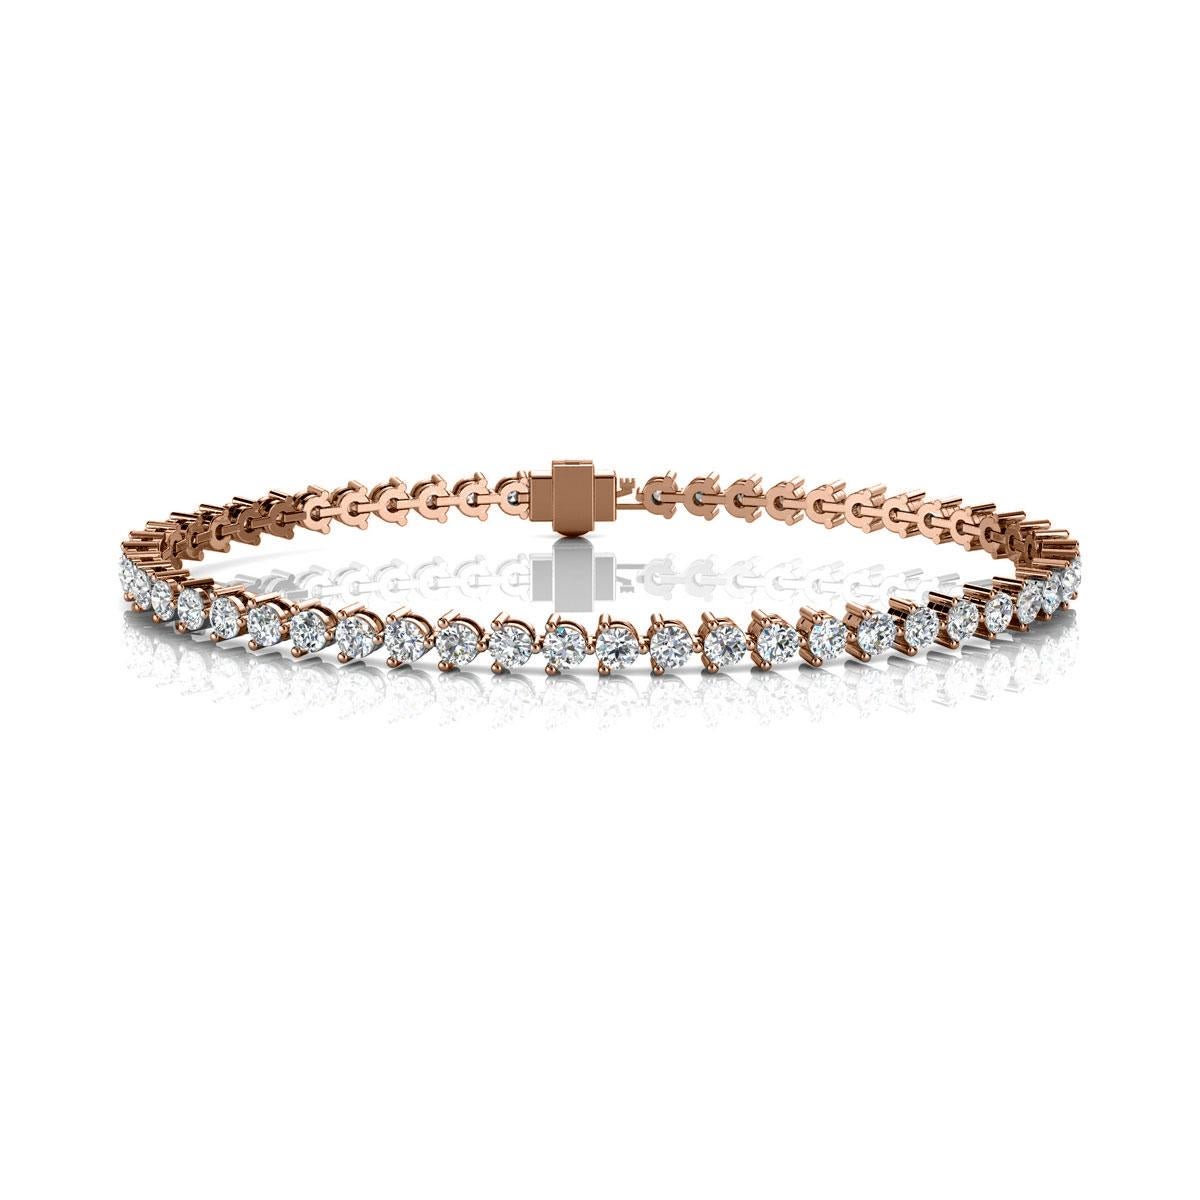 A timeless three prongs diamonds tennis bracelet. Experience the Difference!

Product details: 

Center Gemstone Type: NATURAL DIAMOND
Center Gemstone Color: WHITE
Center Gemstone Shape: ROUND
Center Diamond Carat Weight: 4
Metal: 18K Rose